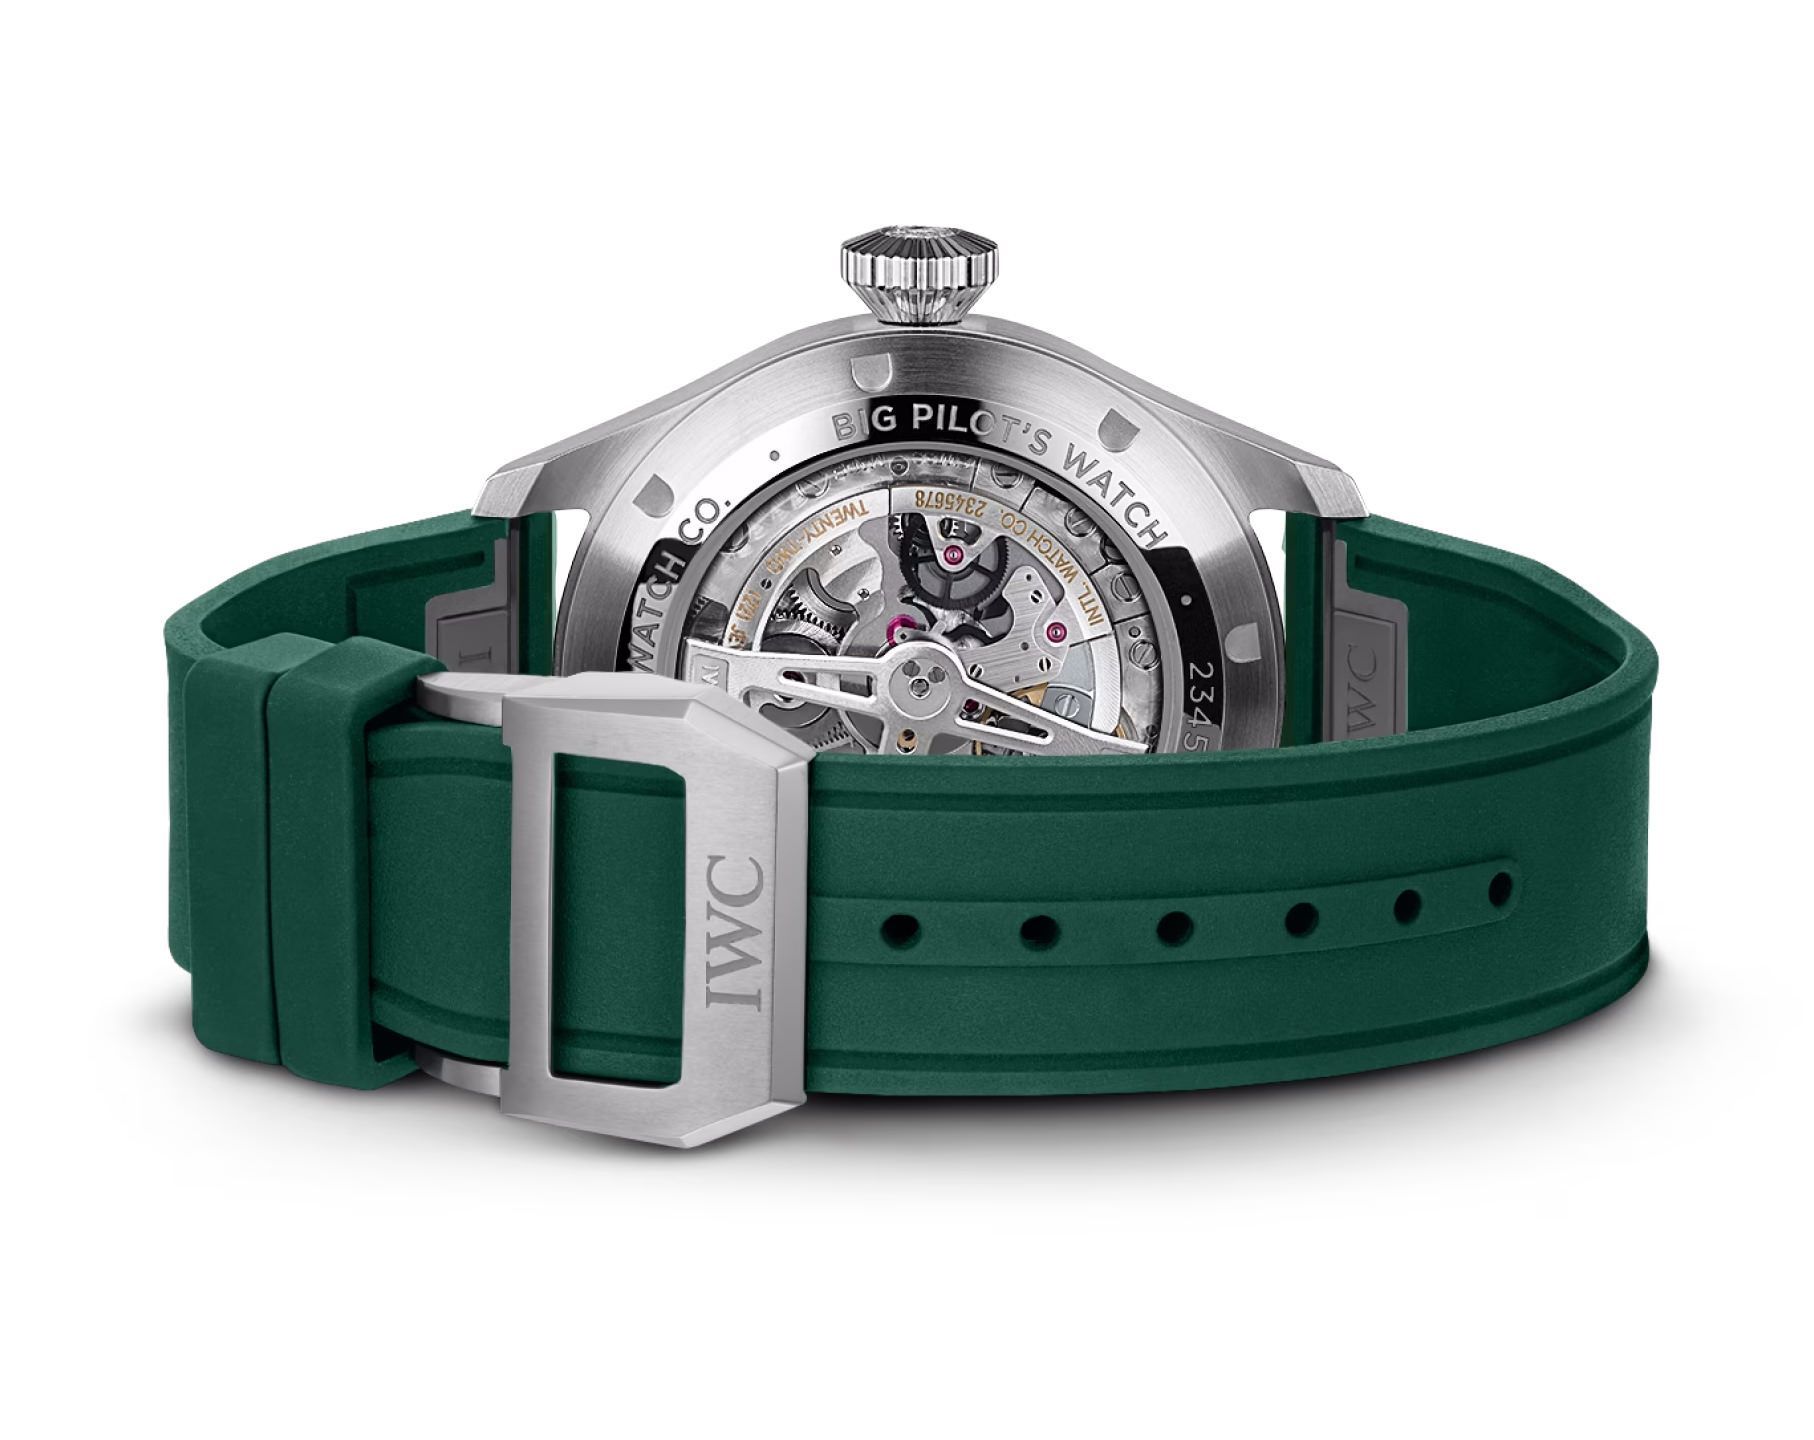 IWC Pilot’s Watches Classic Green Dial 43 mm Automatic Watch For Men - 4